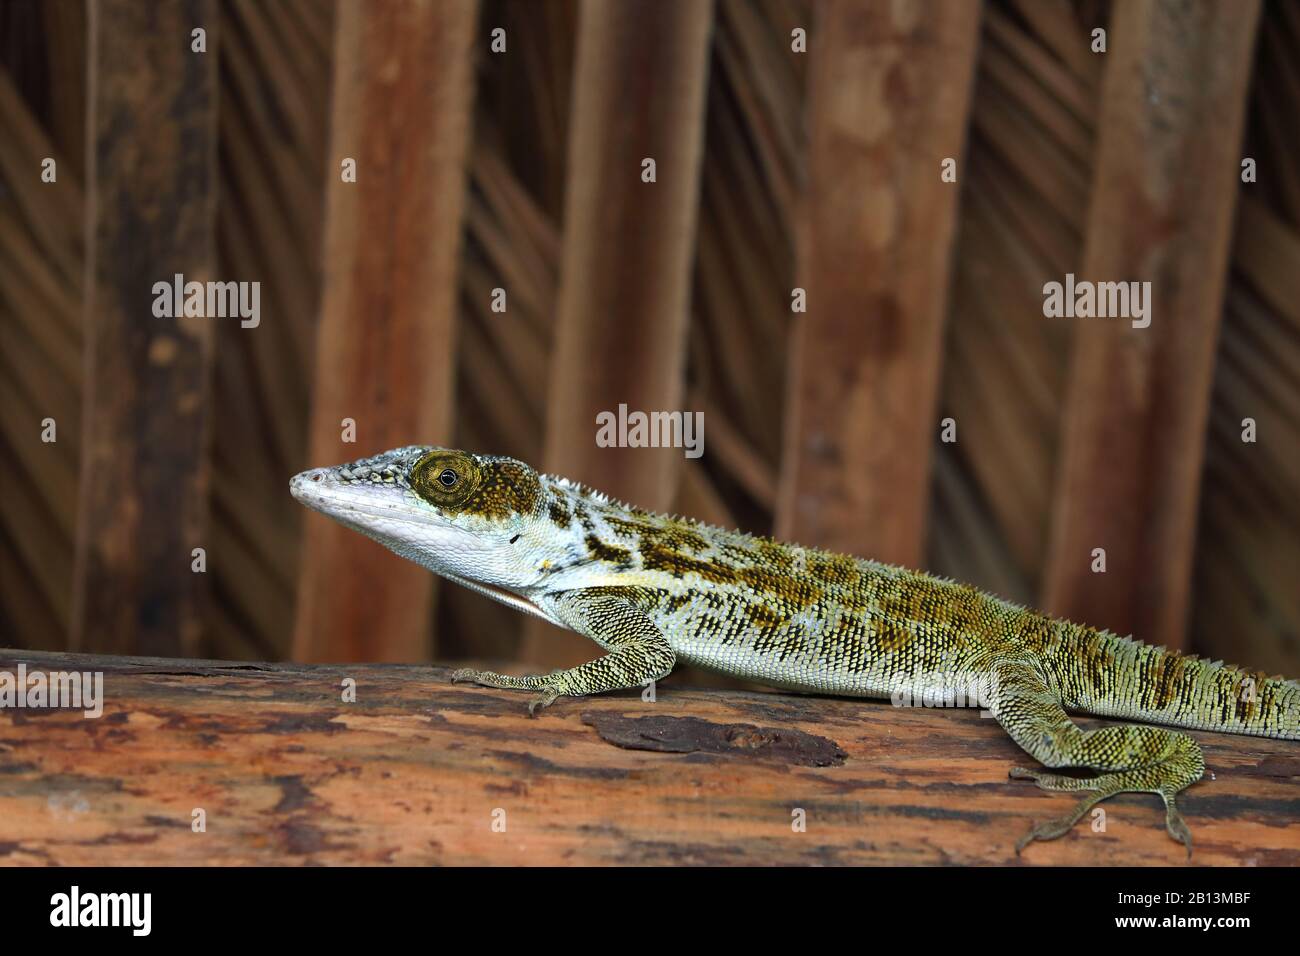 knight anole (Anolis equestris, Deiroptyx equestris), at the roof of a hut, Cuba Stock Photo